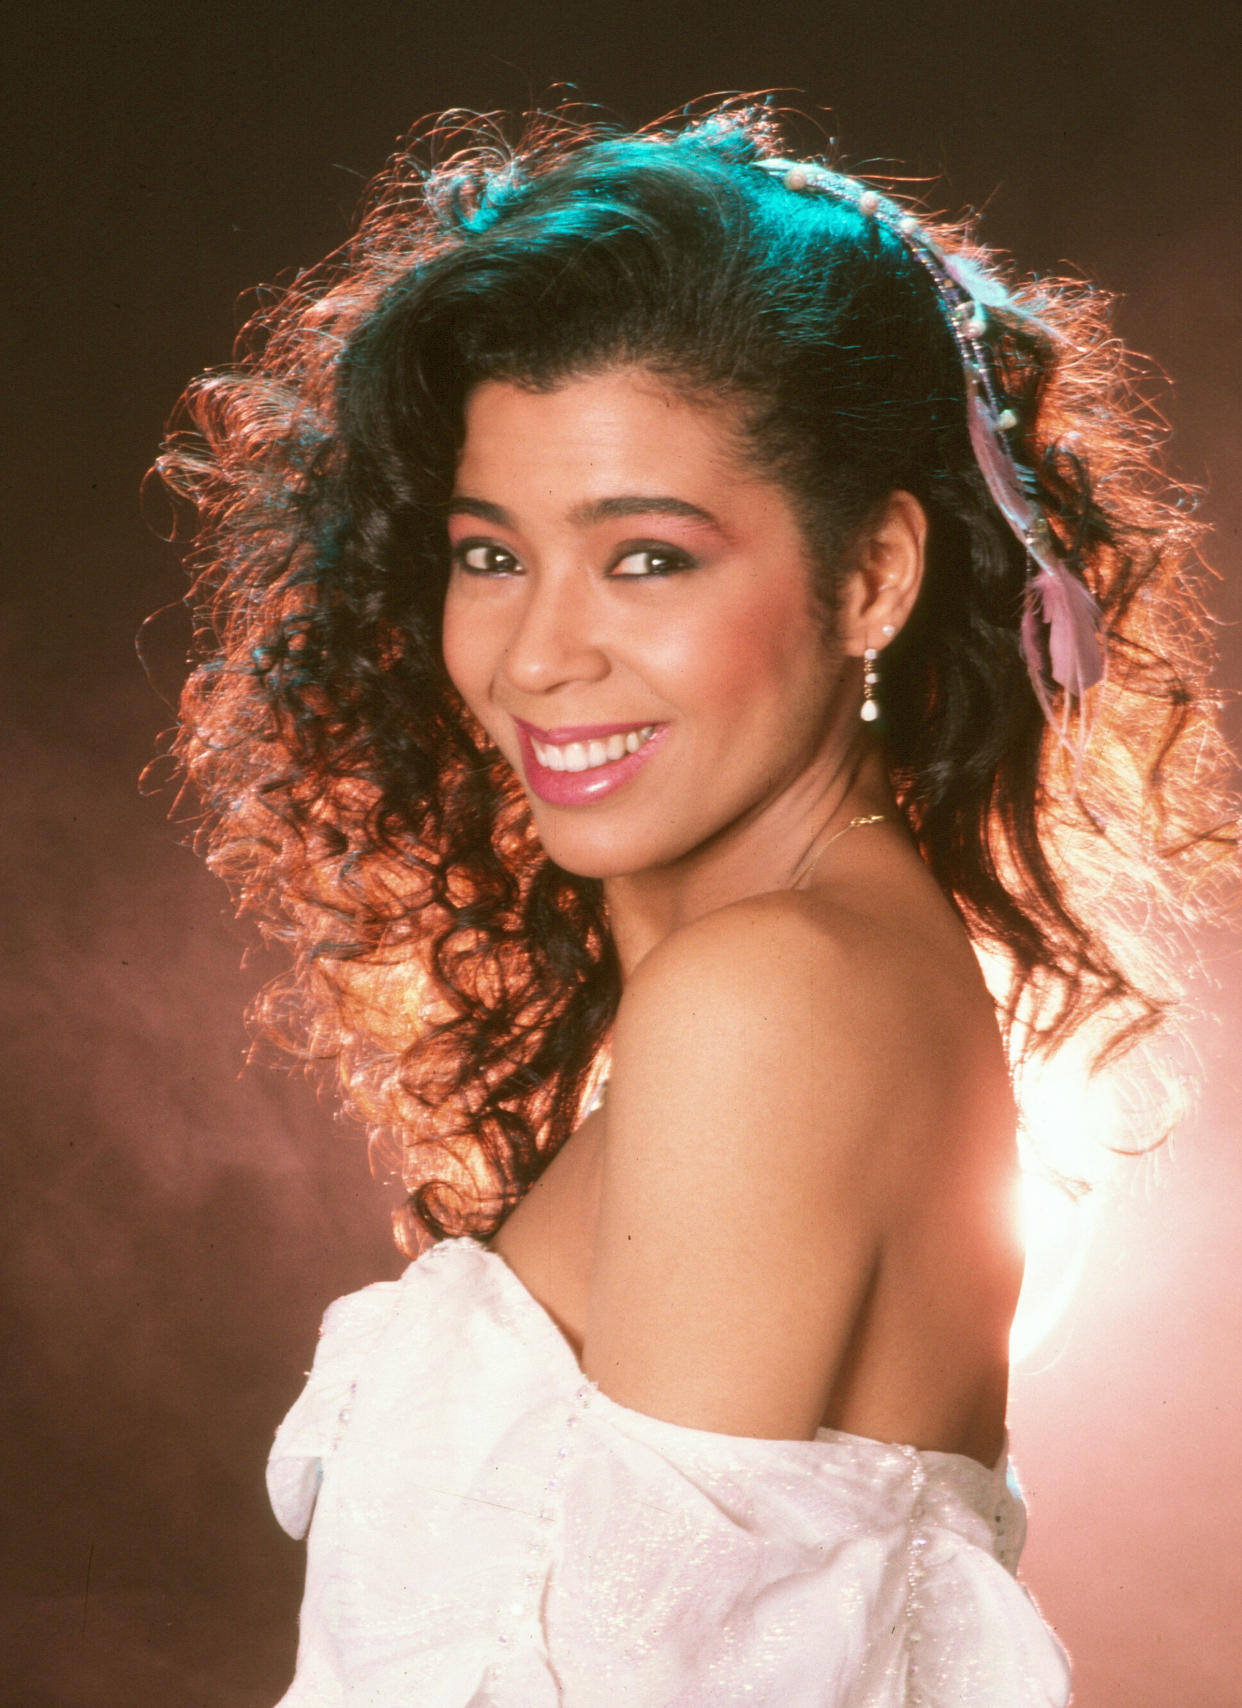 Irene Cara Portrait Session (Harry Langdon / Getty Images)